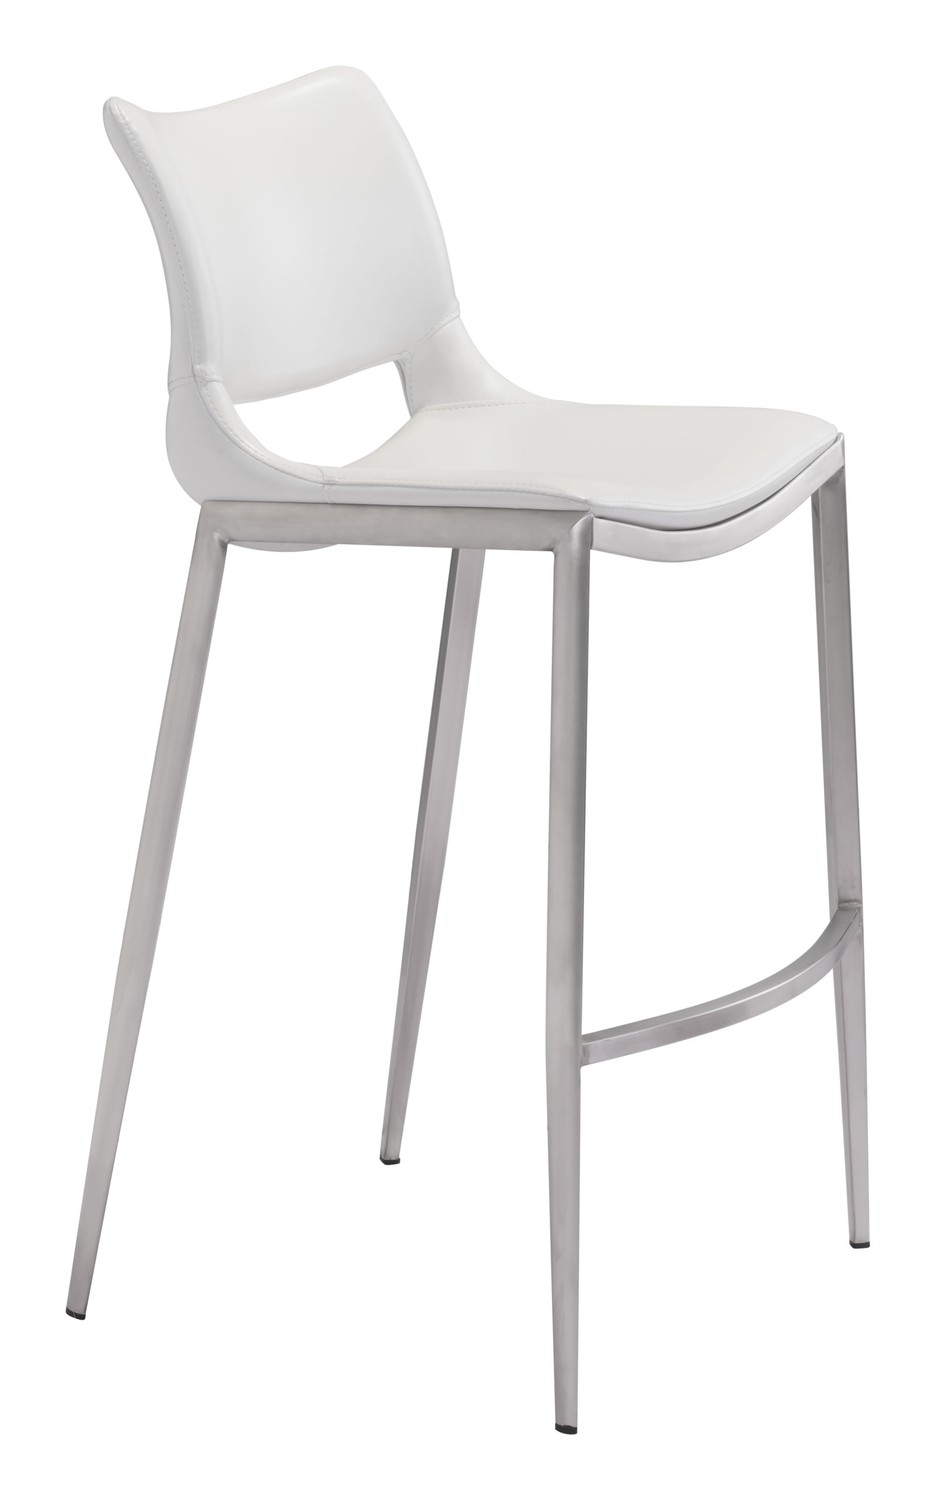 20.9" x 21.7" x 40.9" White, Leatherette, Brushed Stainless Steel, Bar Chair - Set of 2